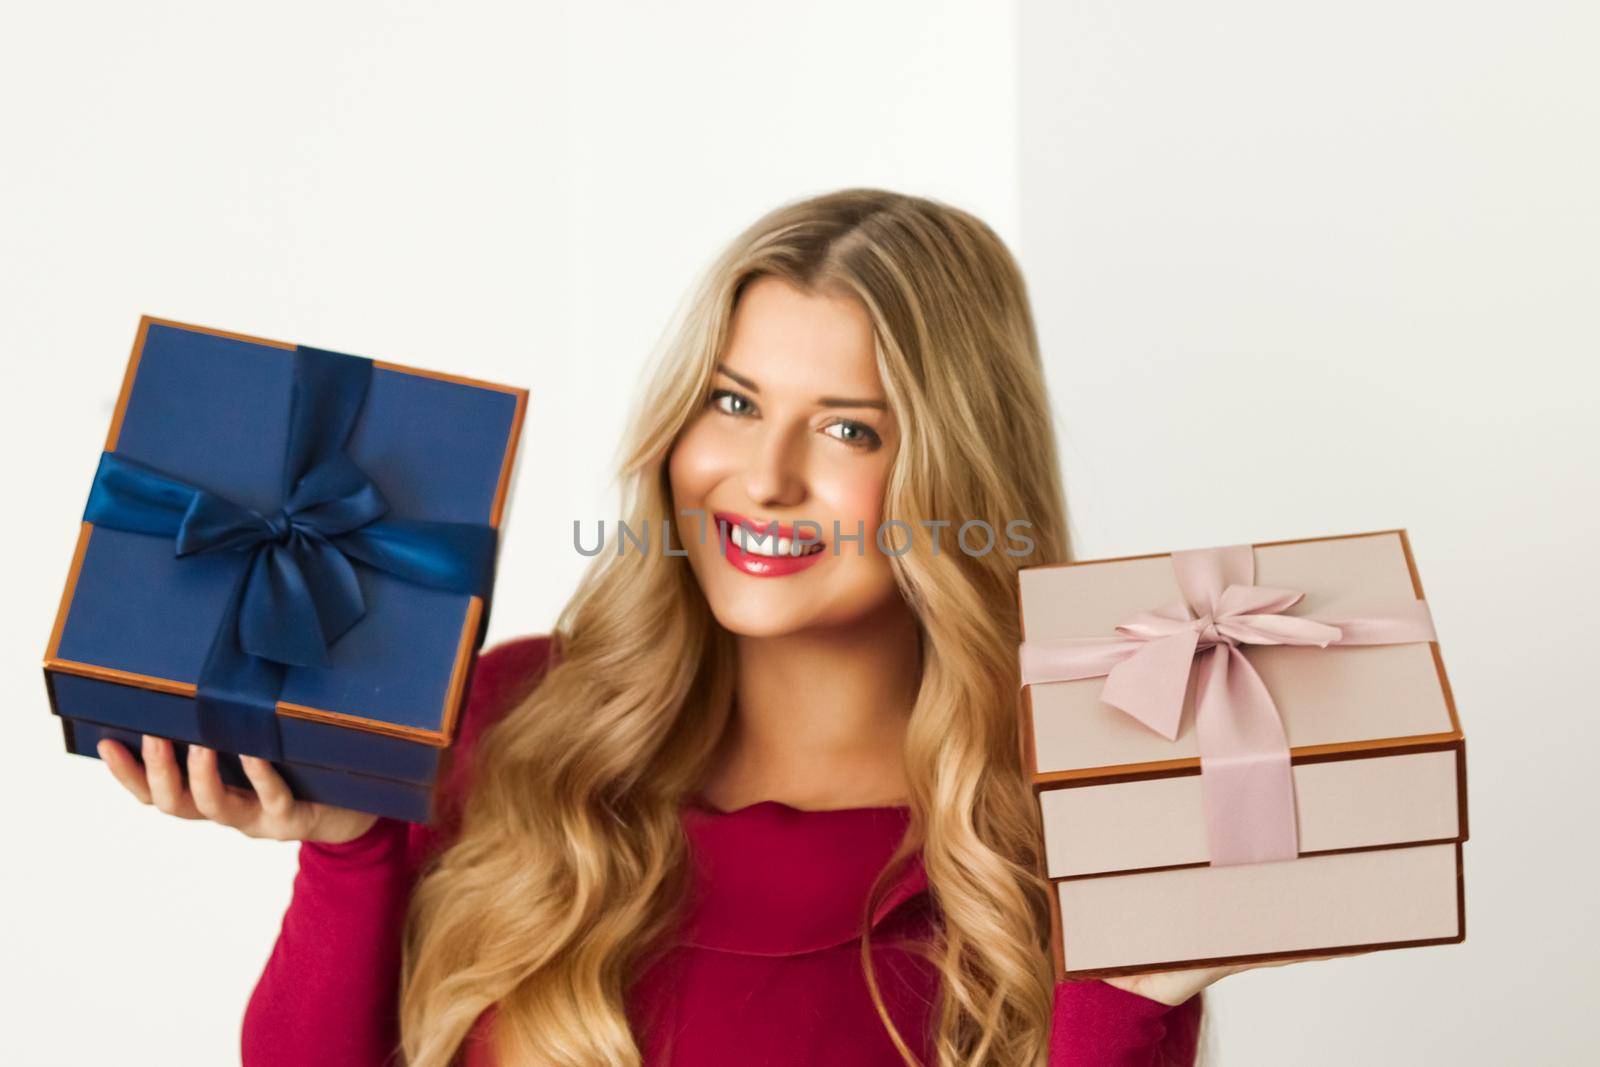 Happy woman holding gifts for birthday, anniversary, wedding, Valentines day or Christmas, luxury holiday present or beauty box subscription delivery by Anneleven